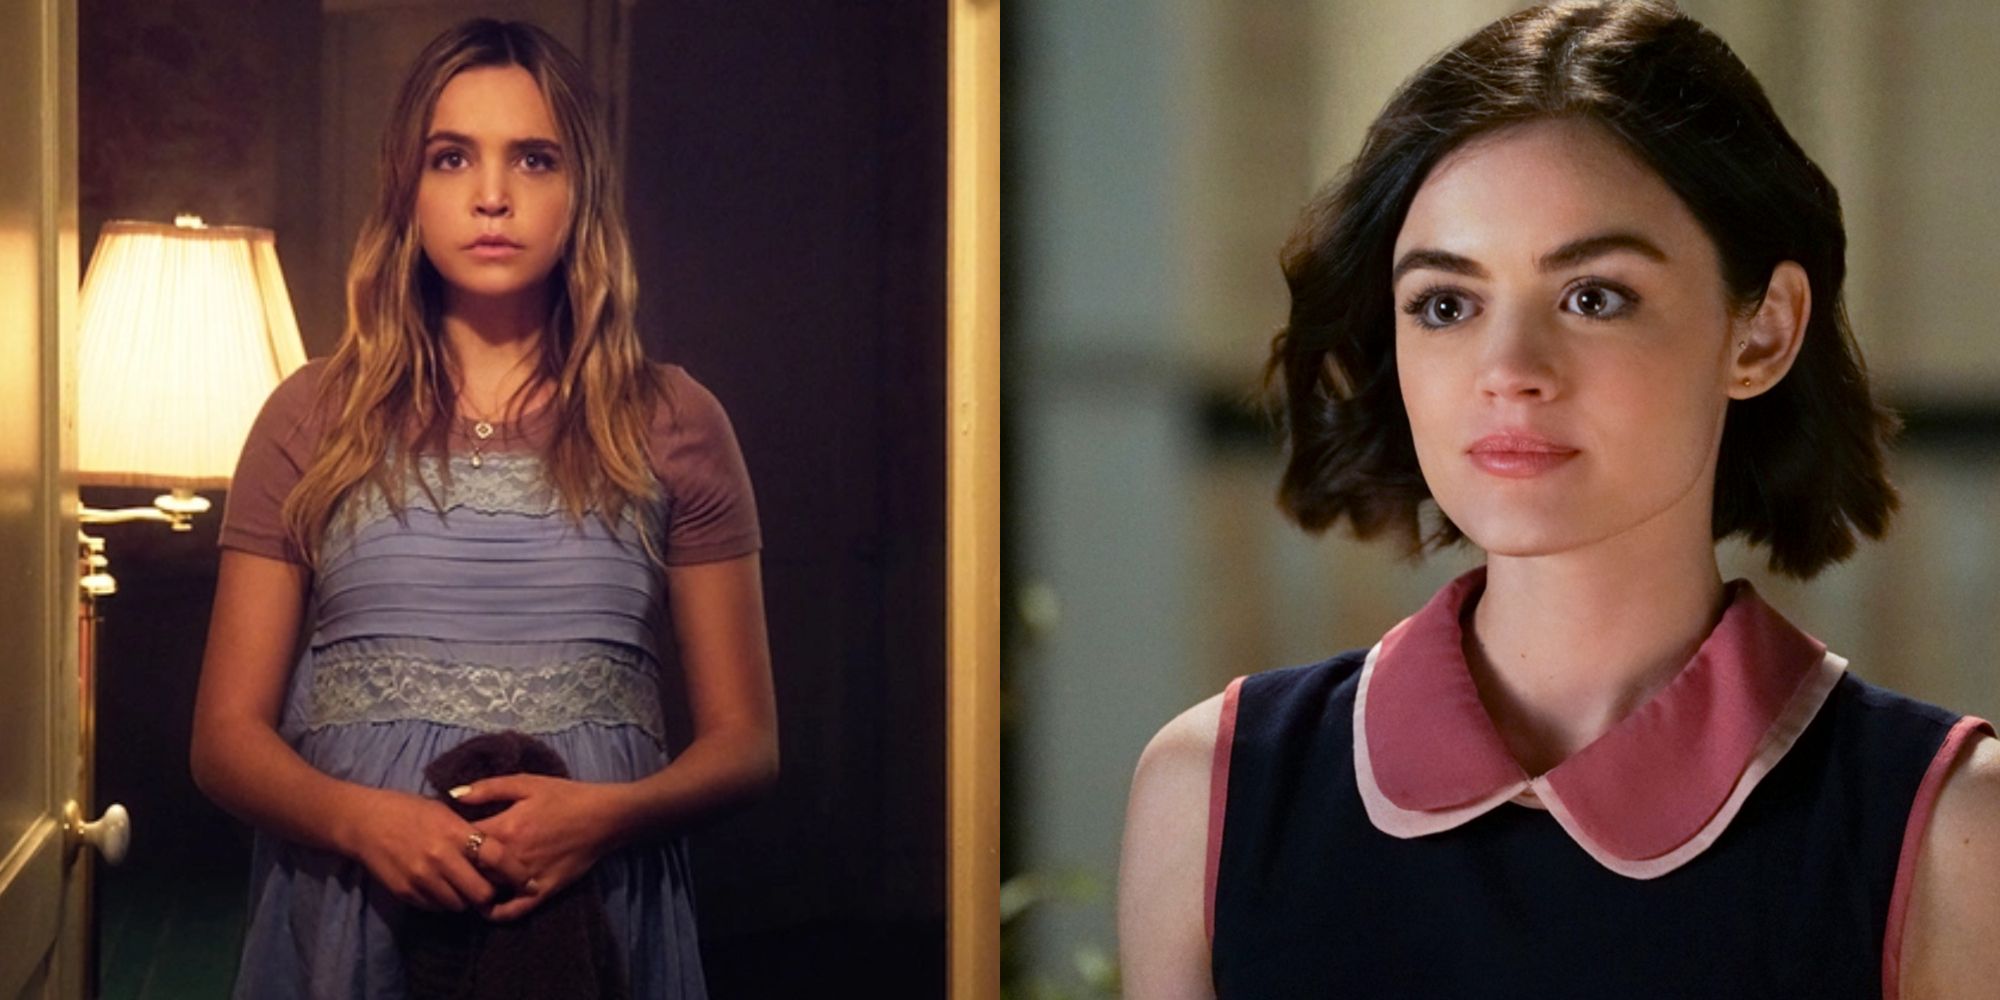 Split image of Imogen and Aria from the PLL franchise